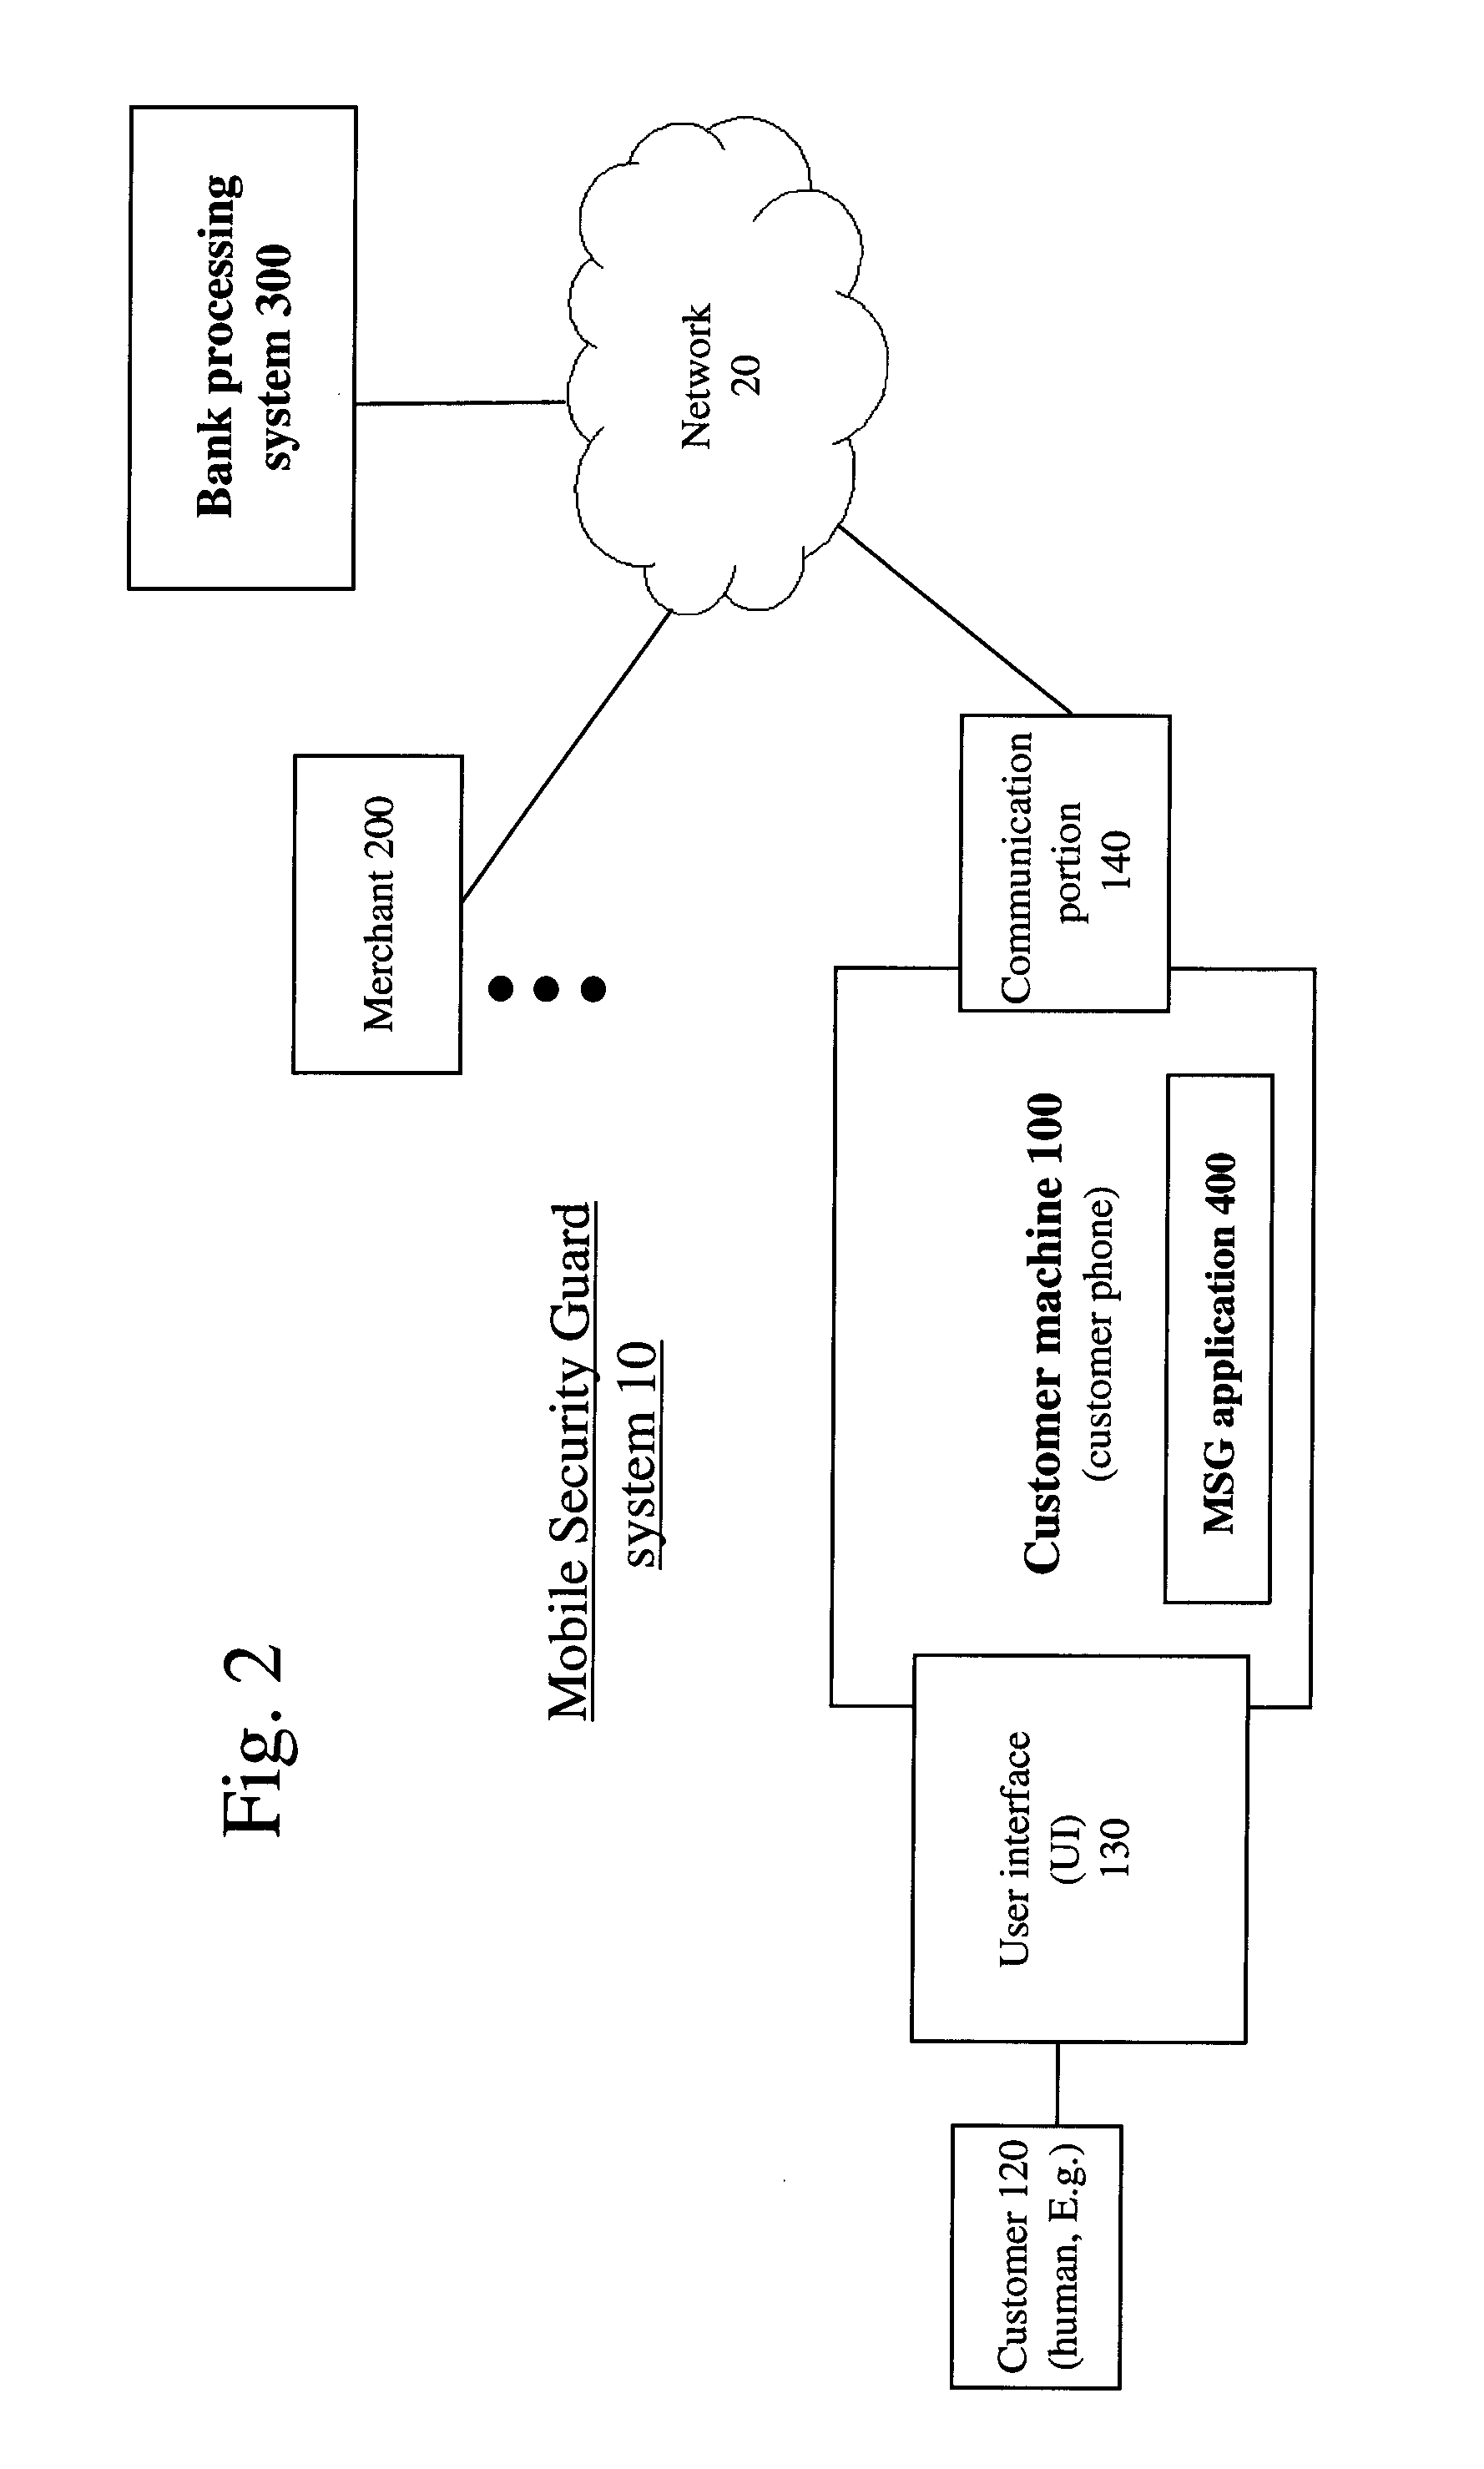 Systems and methods for providing a mobile financial platform